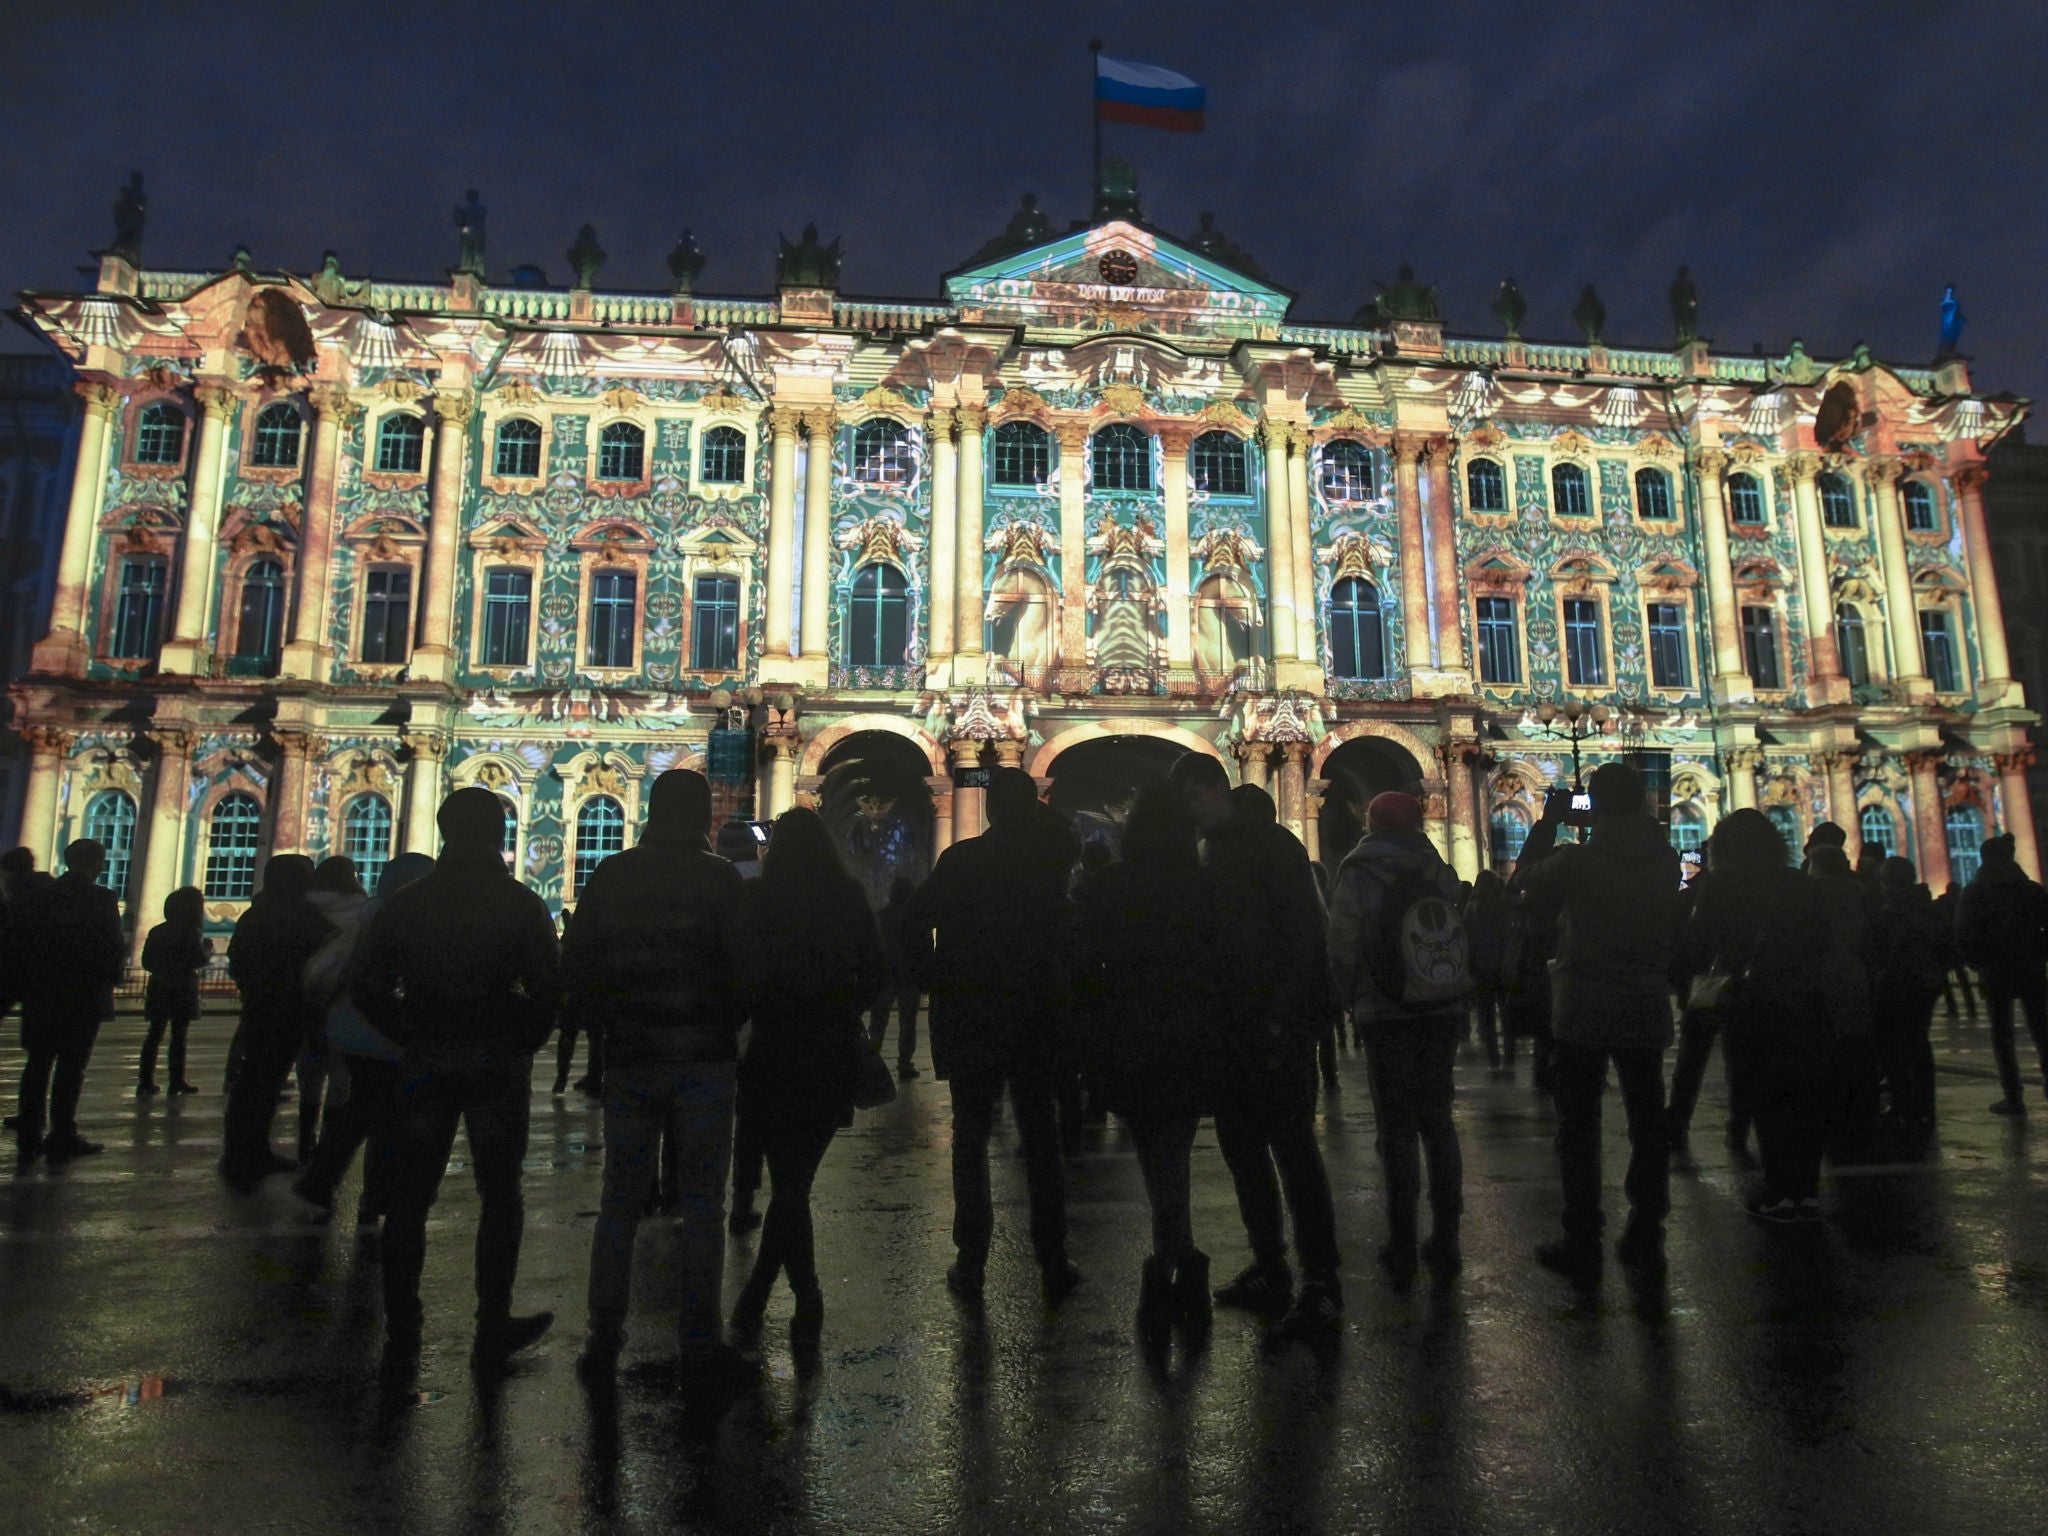 A light show marking the centenary of the Bolshevik Revolution on the Winter Palace in St Petersburg – although ensuring mass interest in the events of 1917 has been difficult